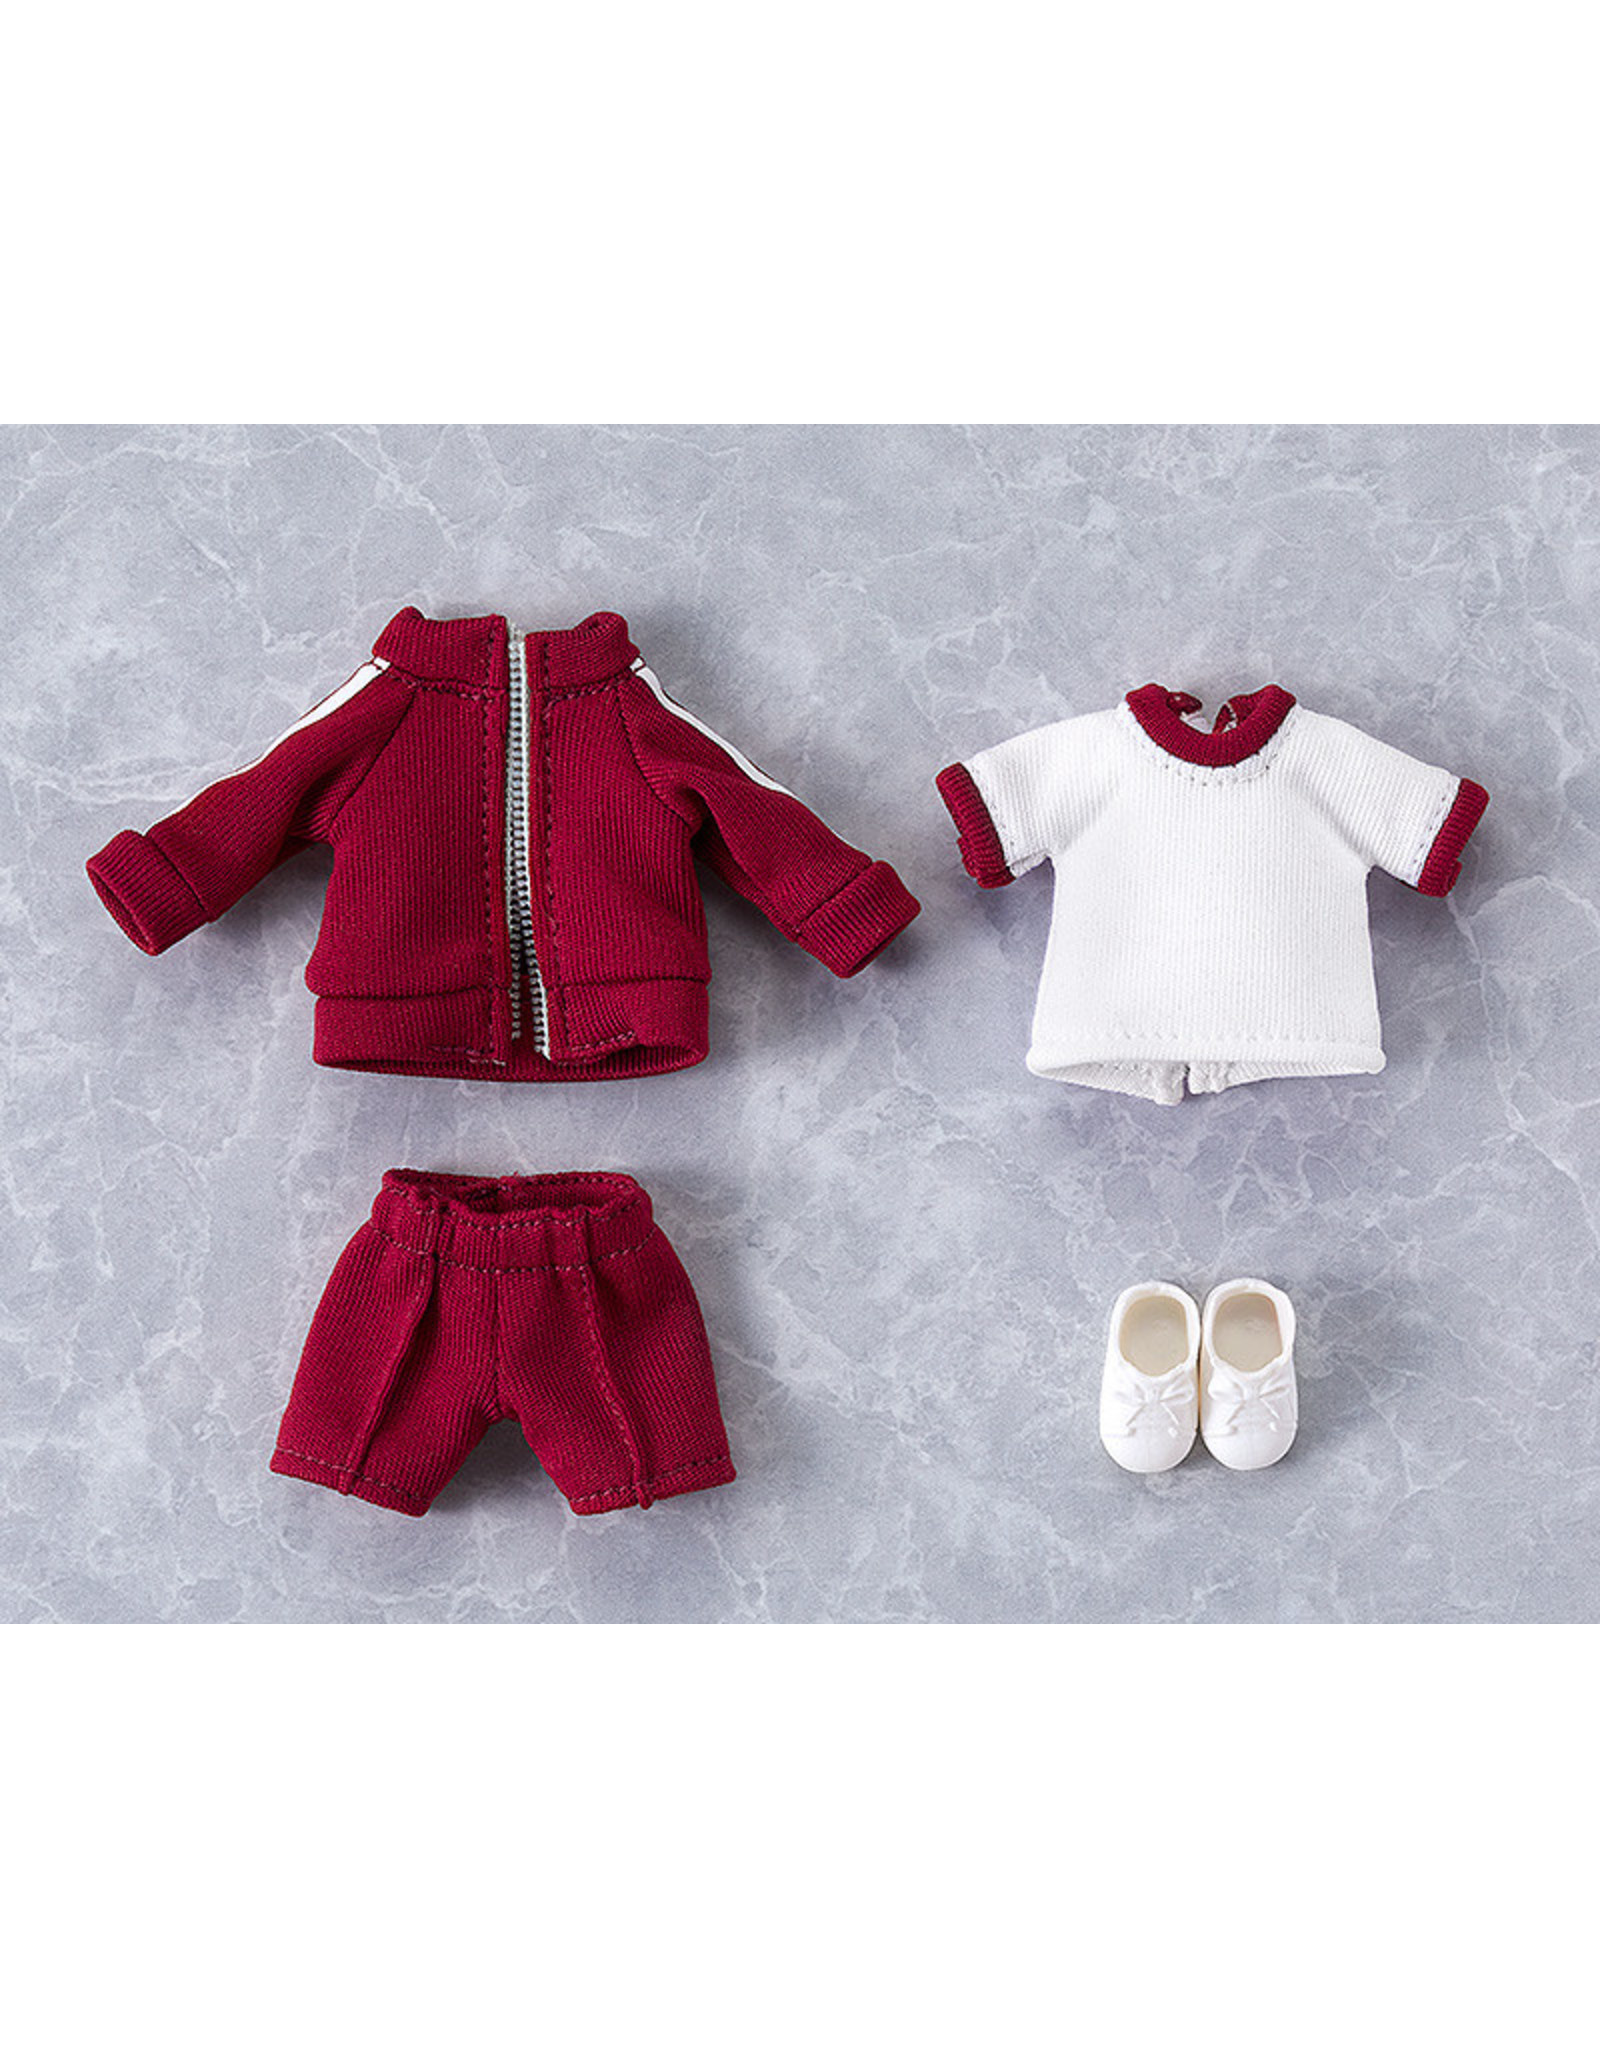 Nendoroid Doll Outfit Gym Clothes- Red